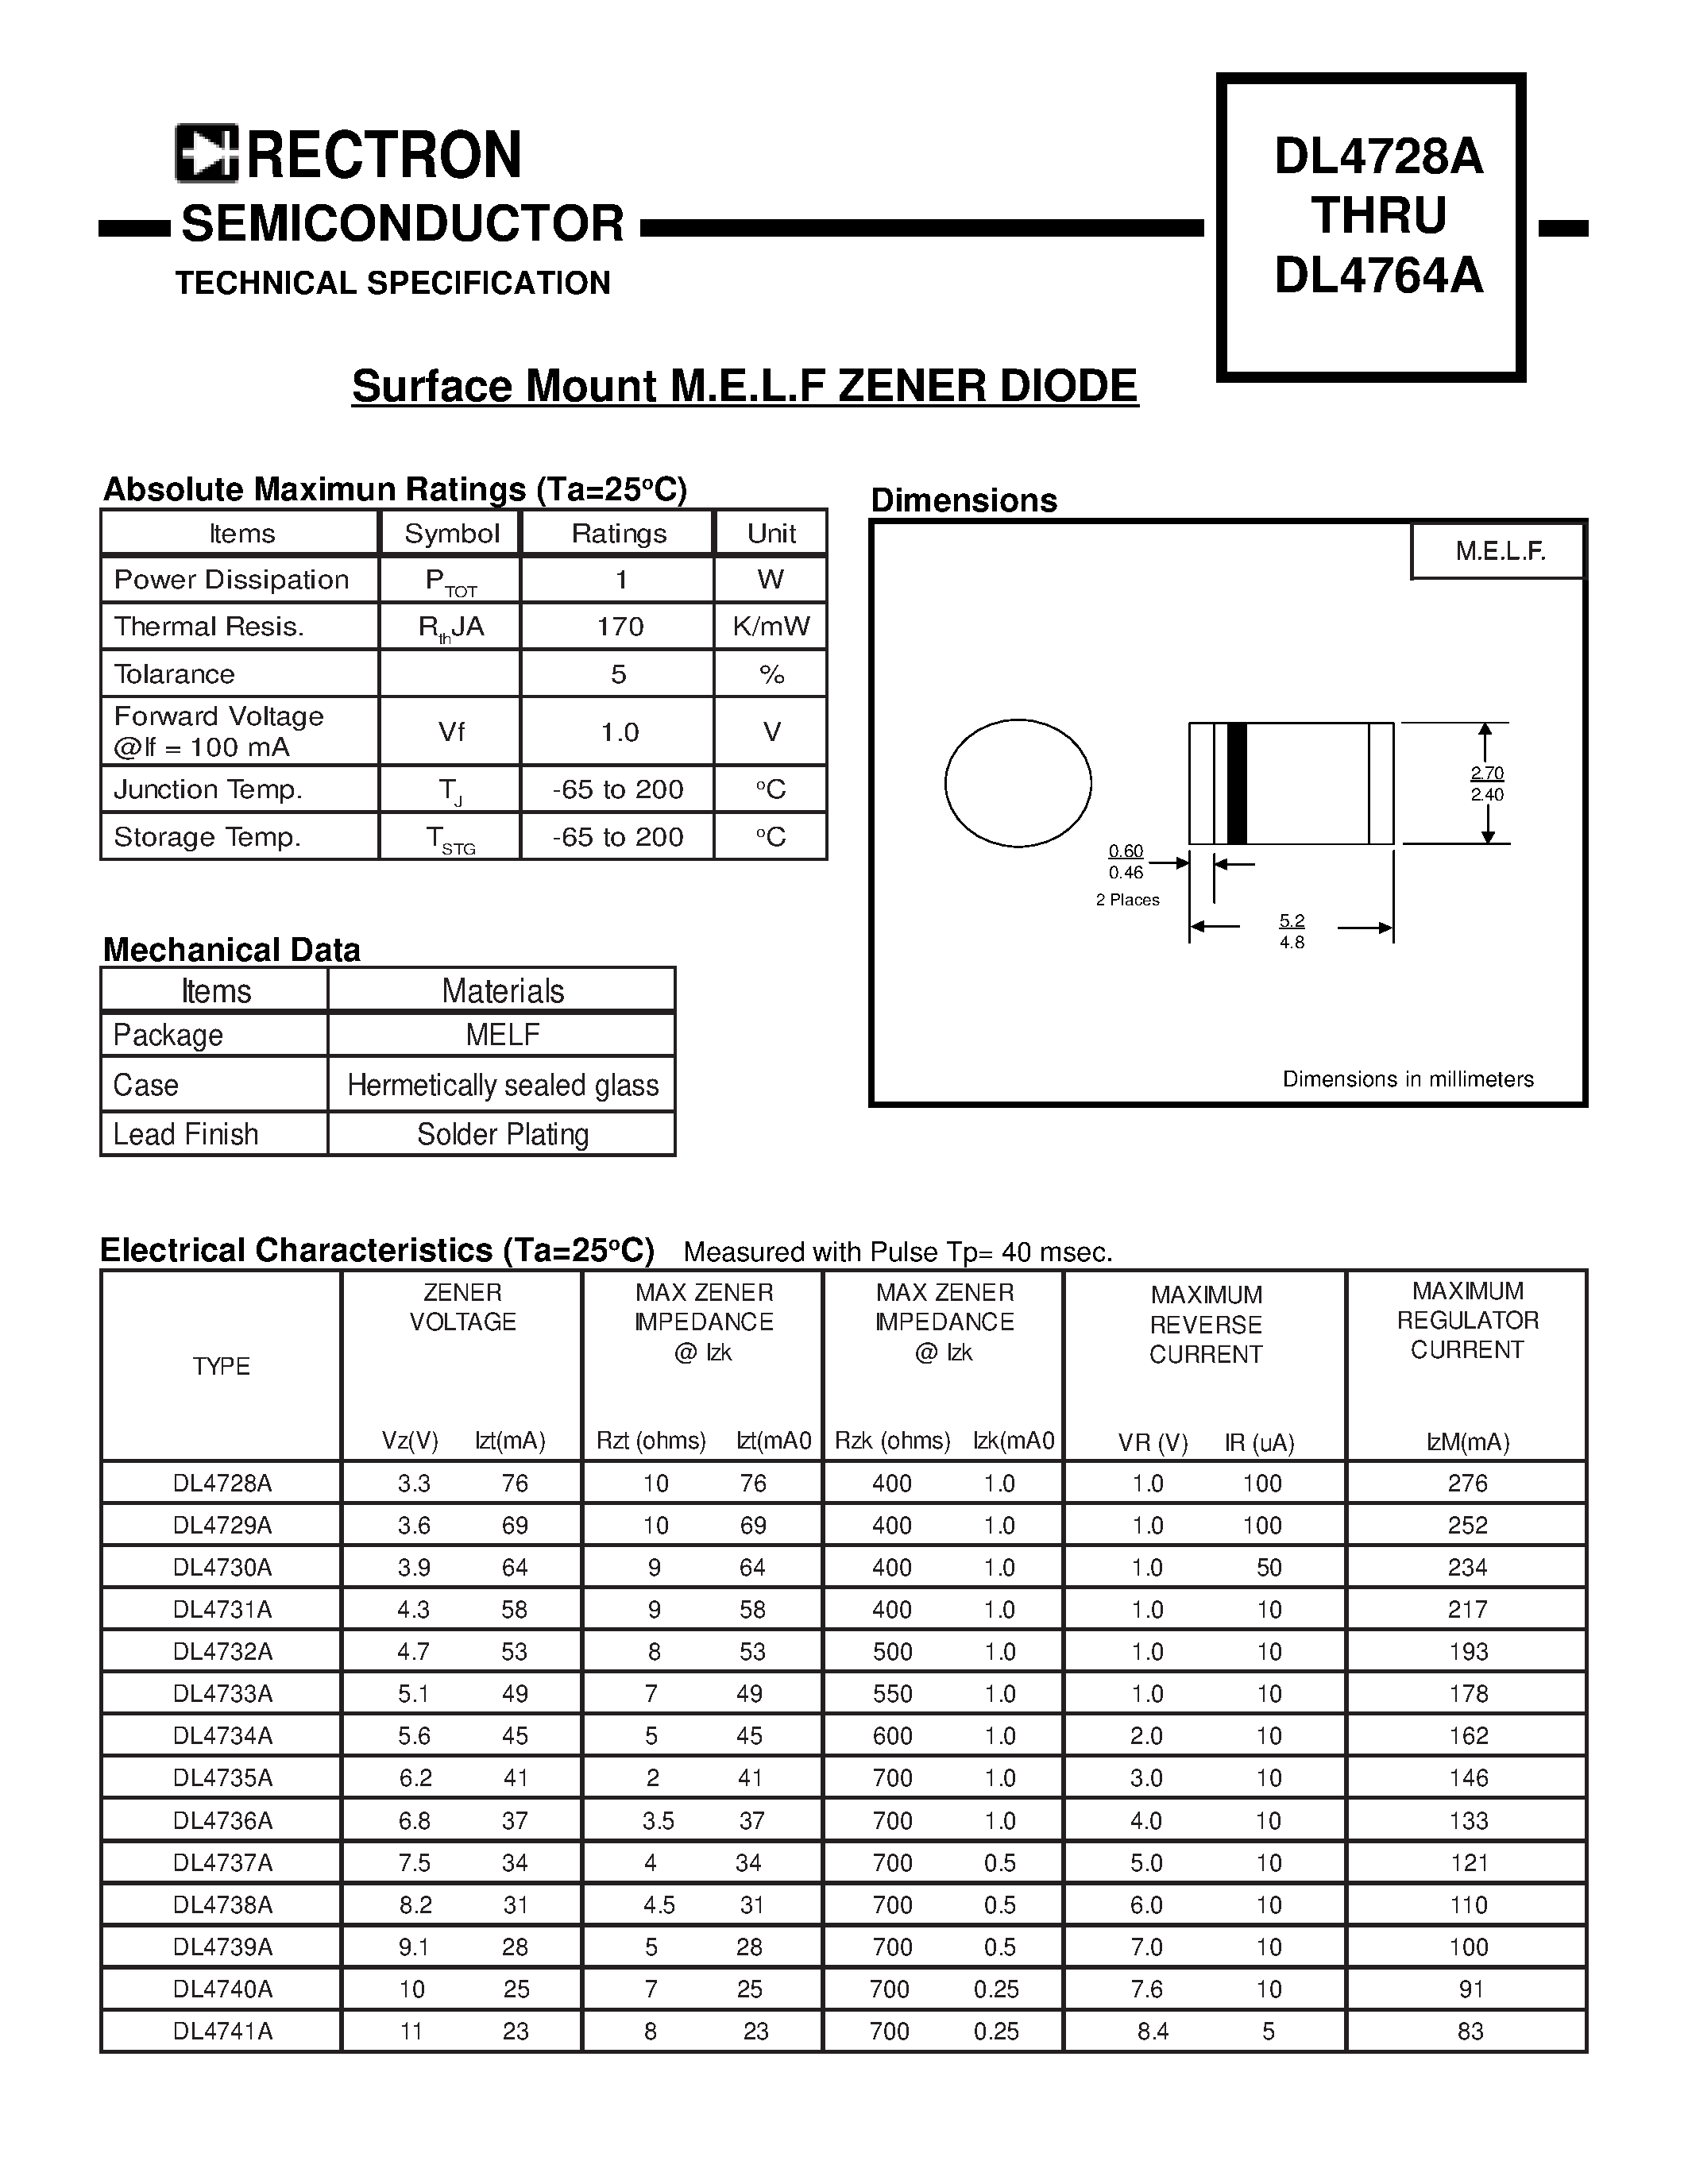 Datasheet DL4733A - Surface Mount M.E.L.F ZENER DIODE page 1